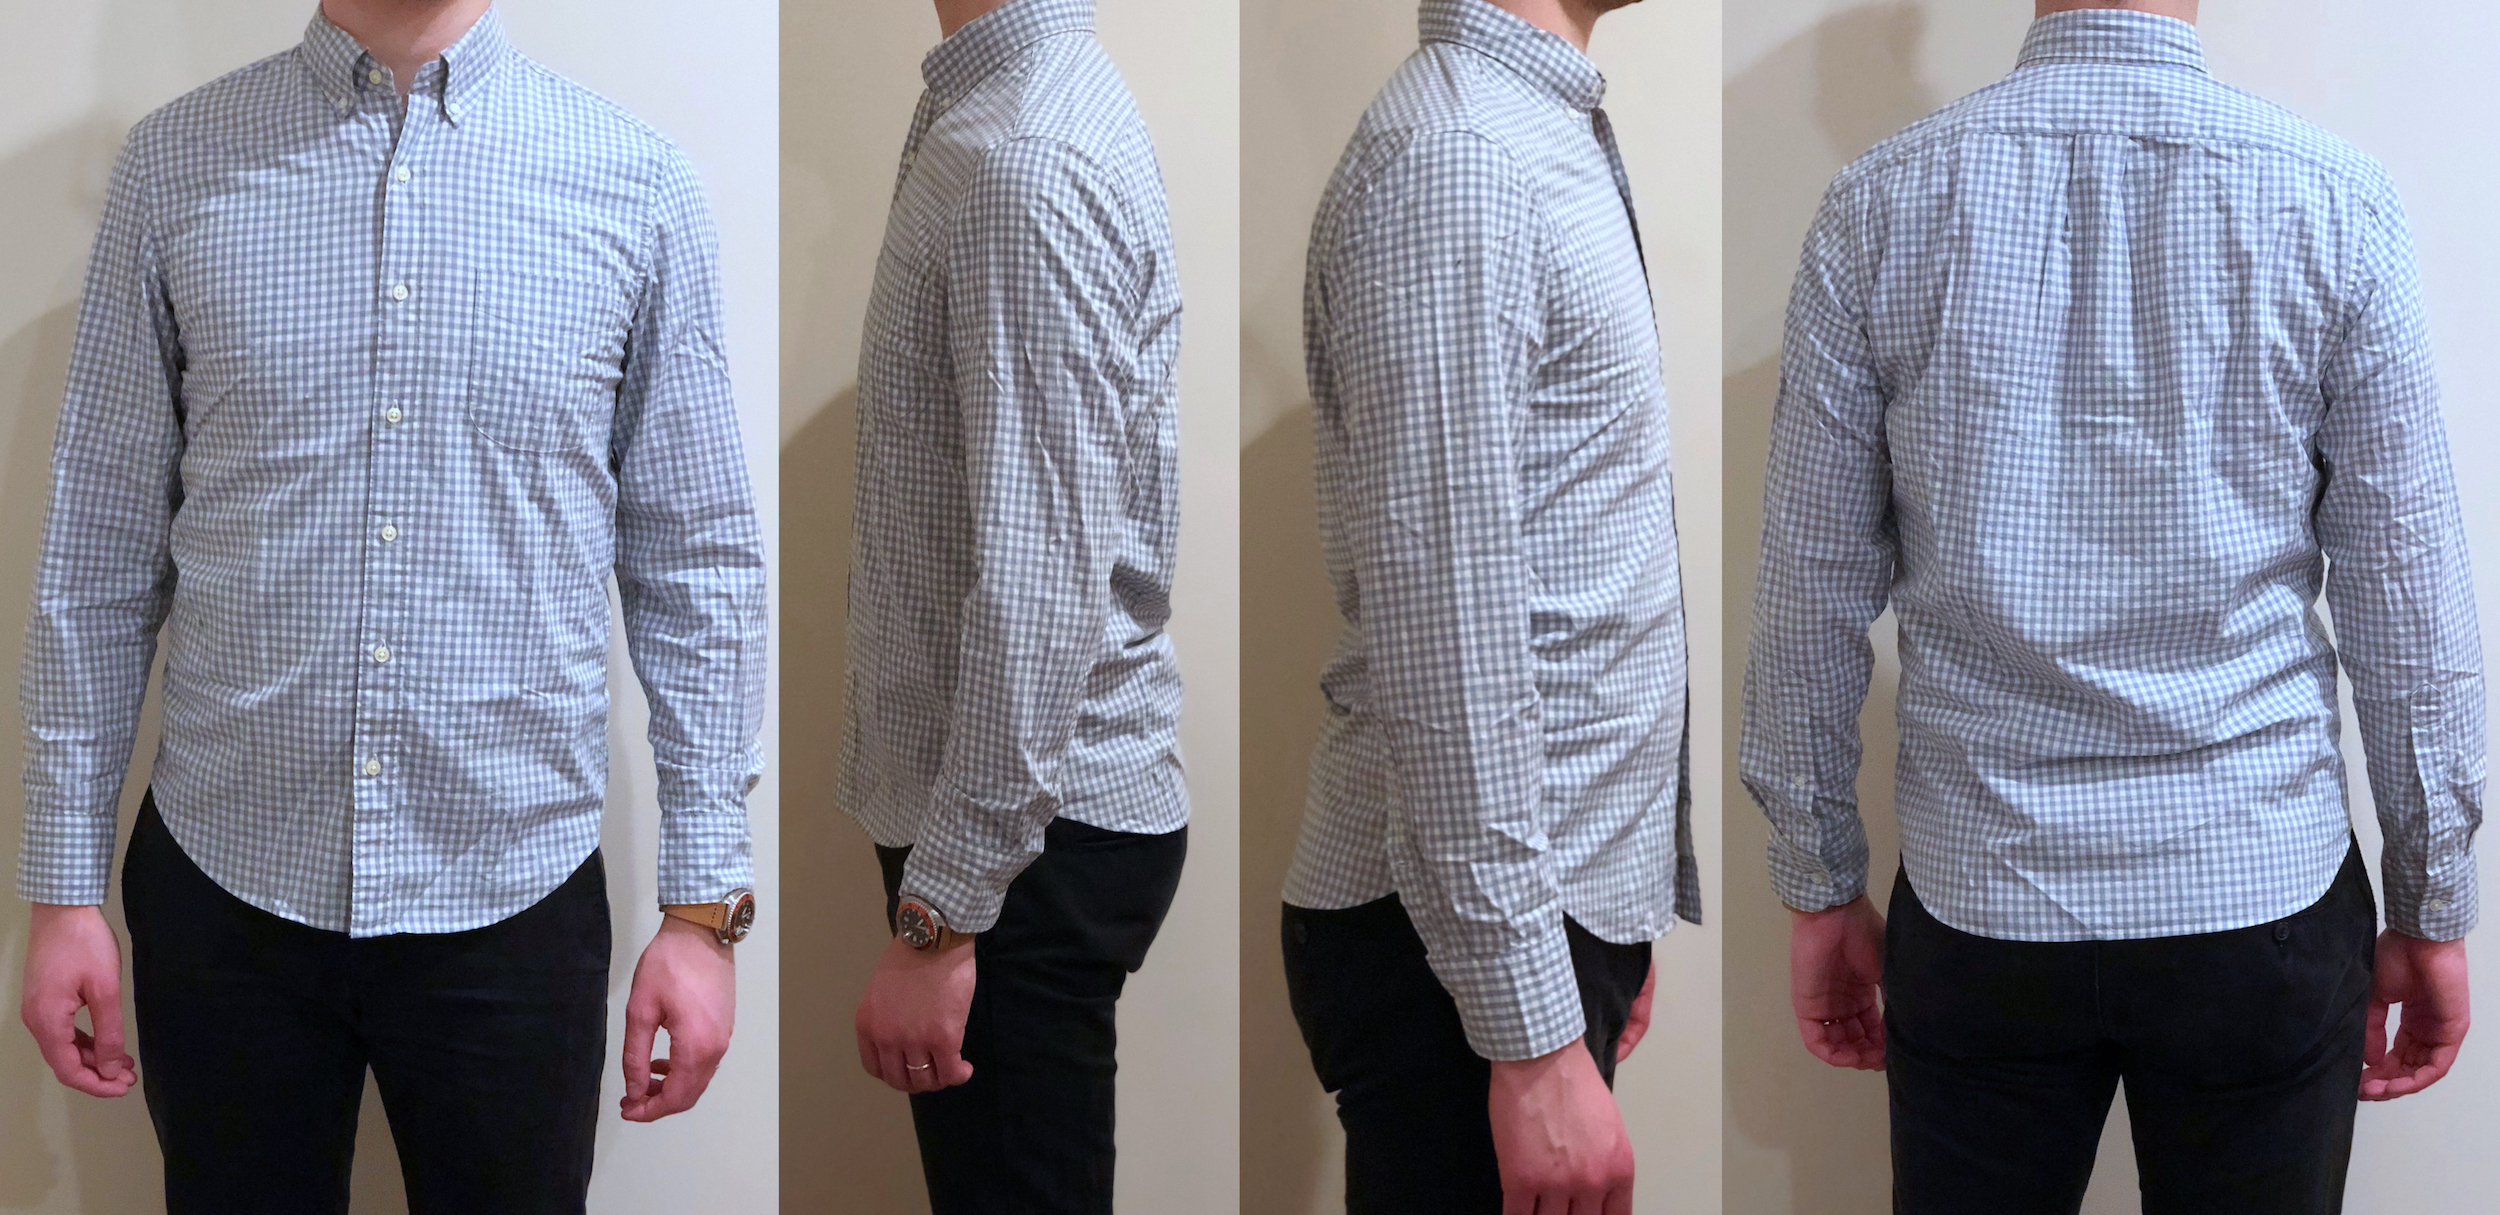 J Crew 'Untucked' Fit Shirts: A 